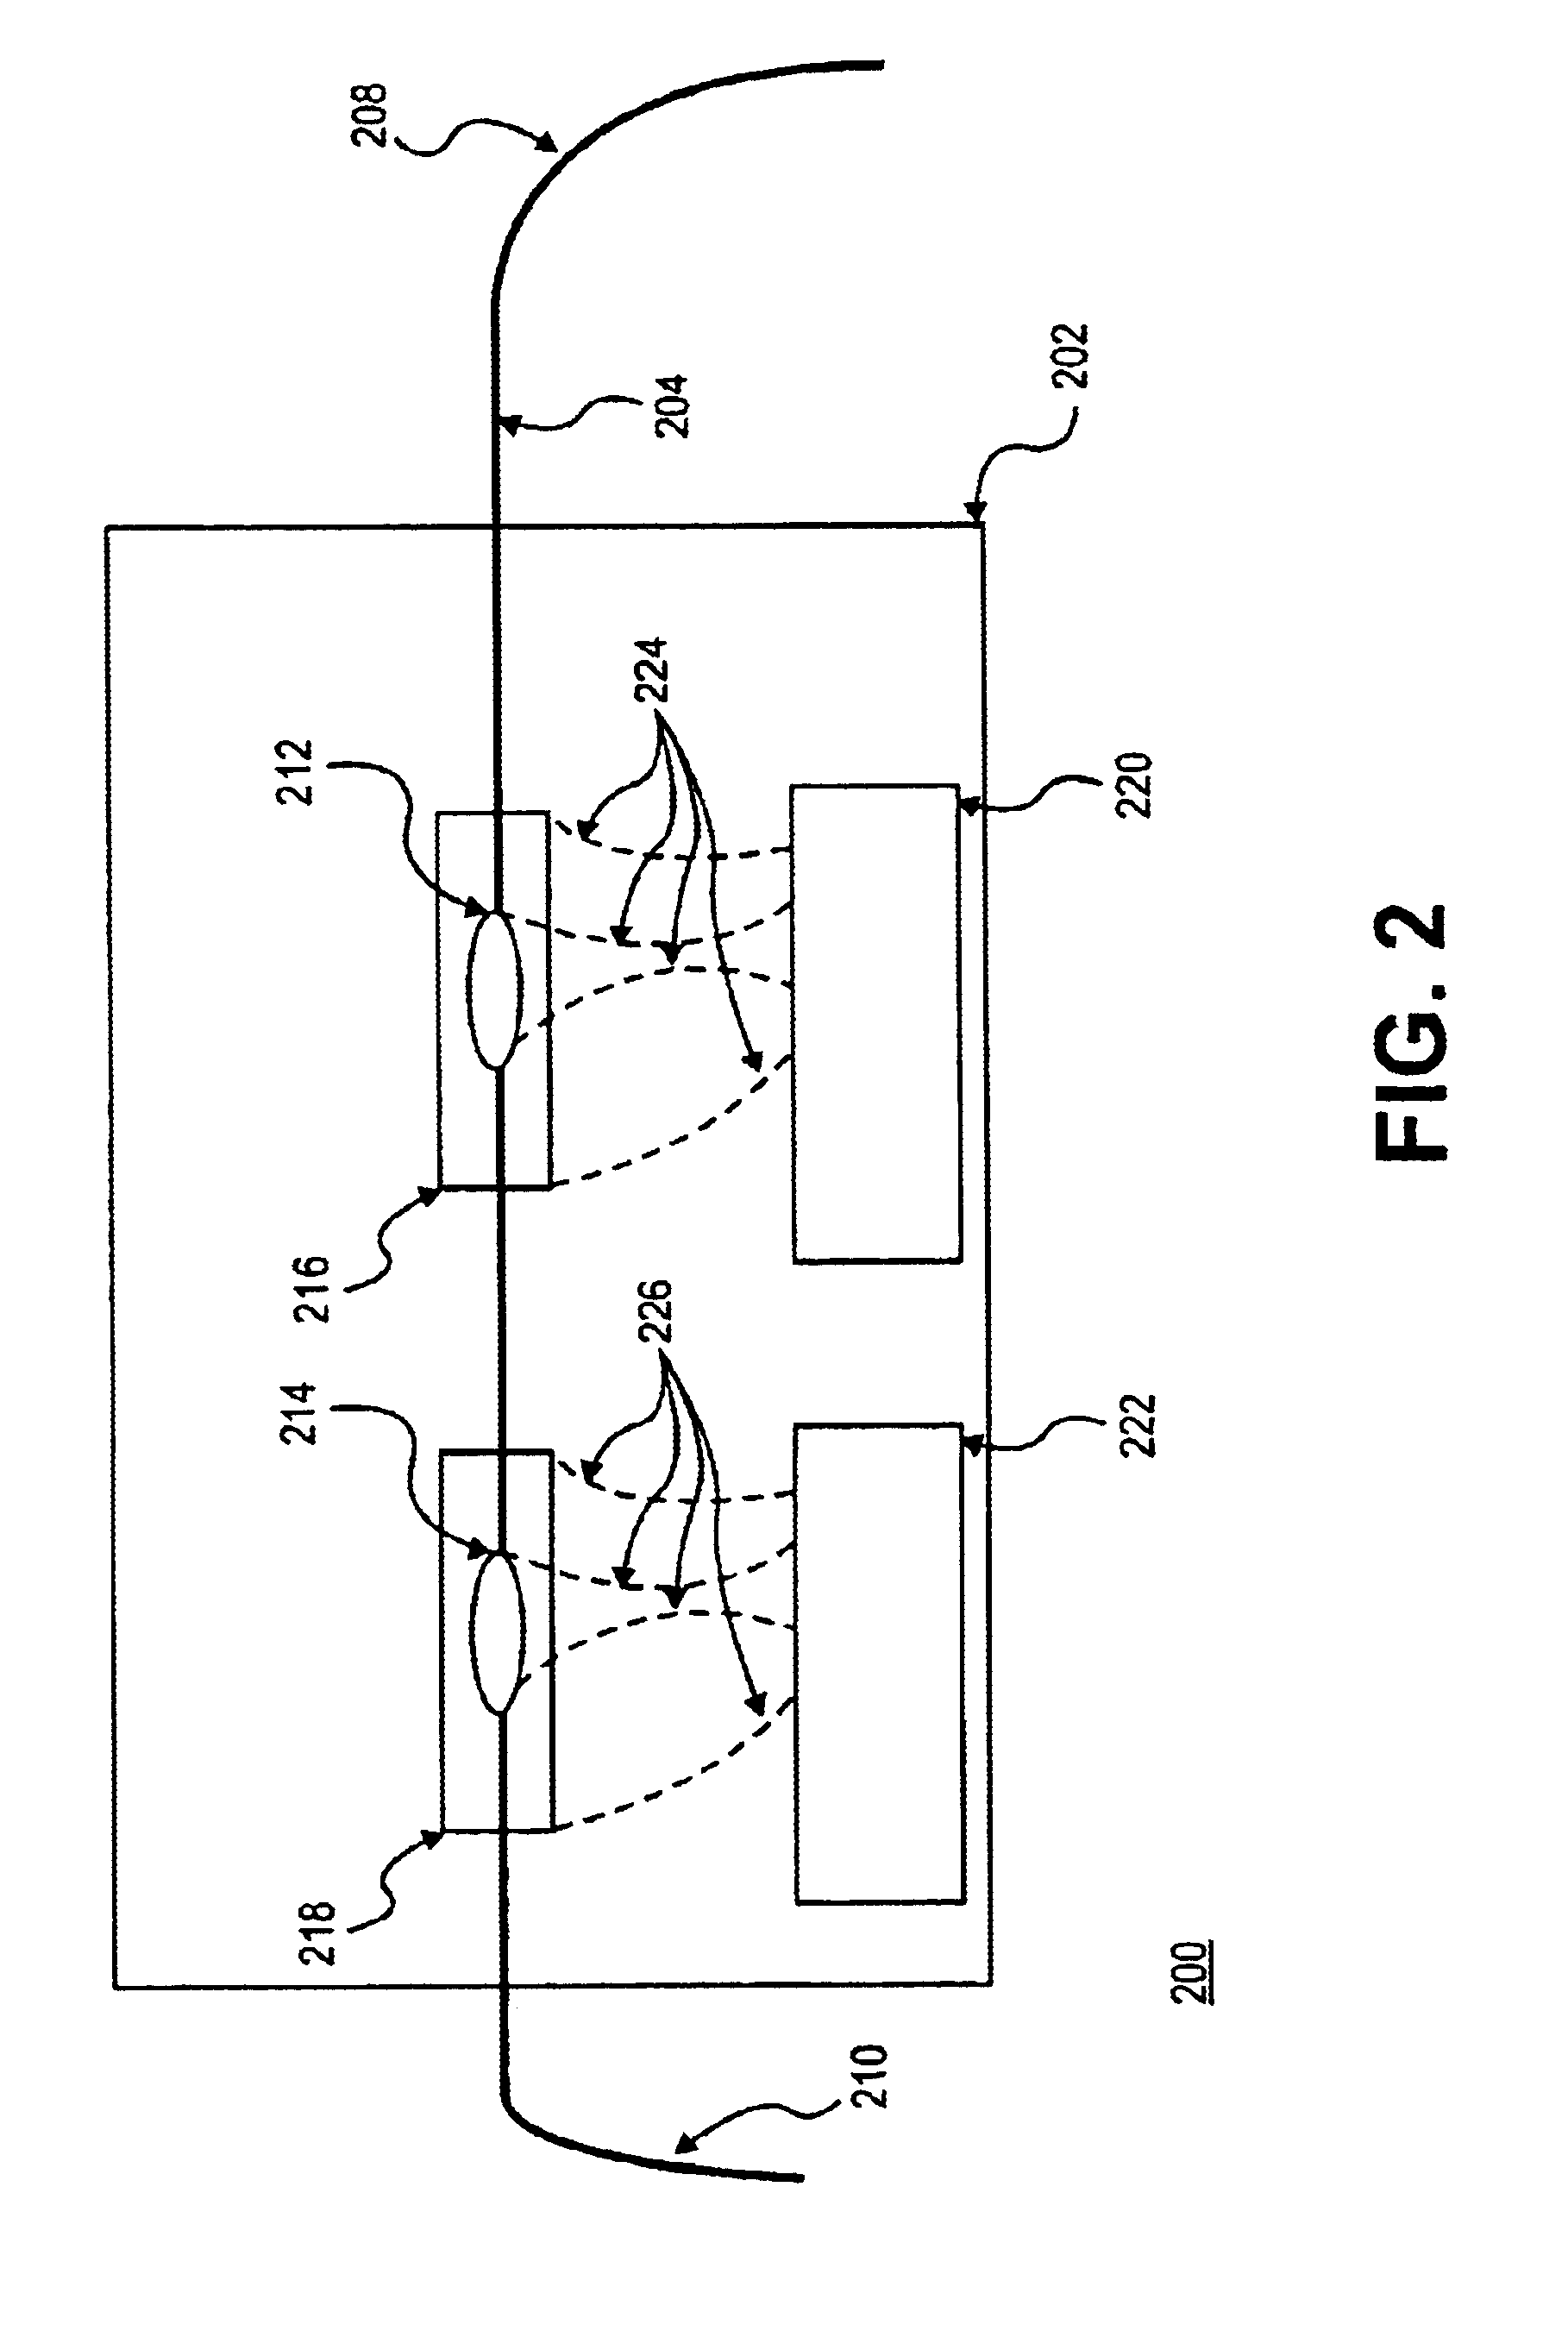 Apparatus and methods for stabilization and control of fiber devices and fiber devices including the same